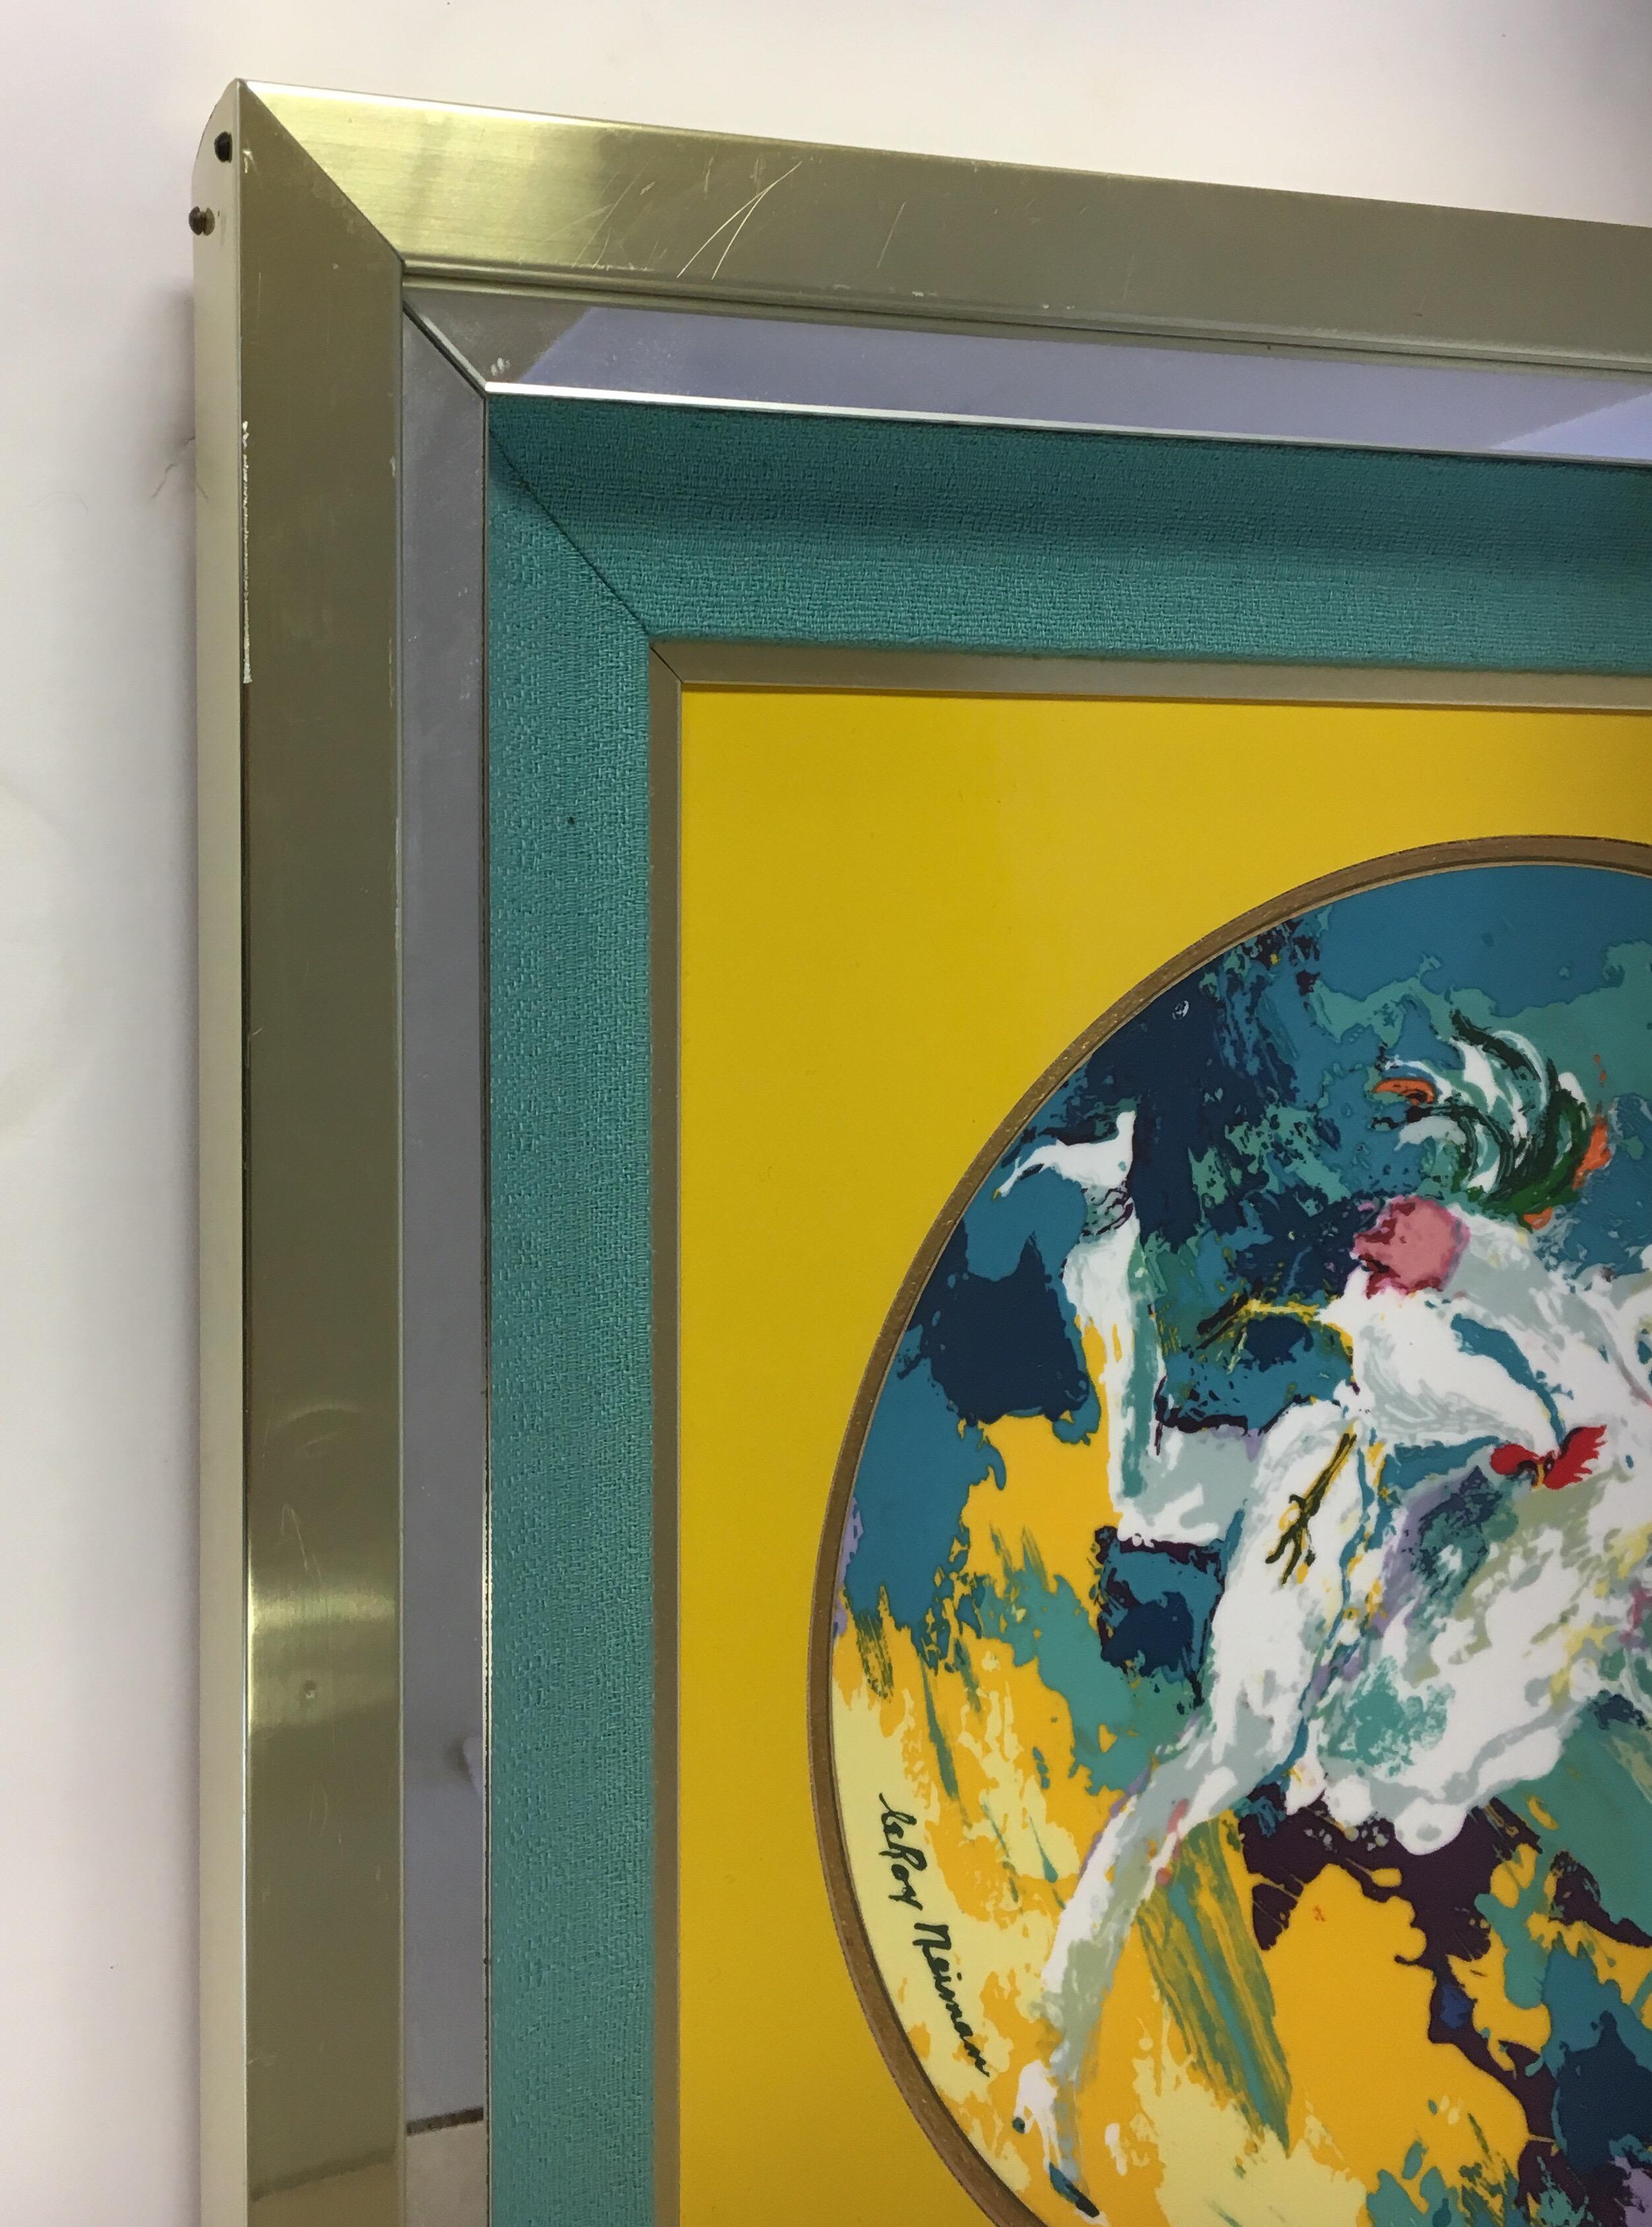 Late 20th Century Leroy Neiman Limited Edition Royal Doulton Punchinello 1978 Framed Artwork Plate